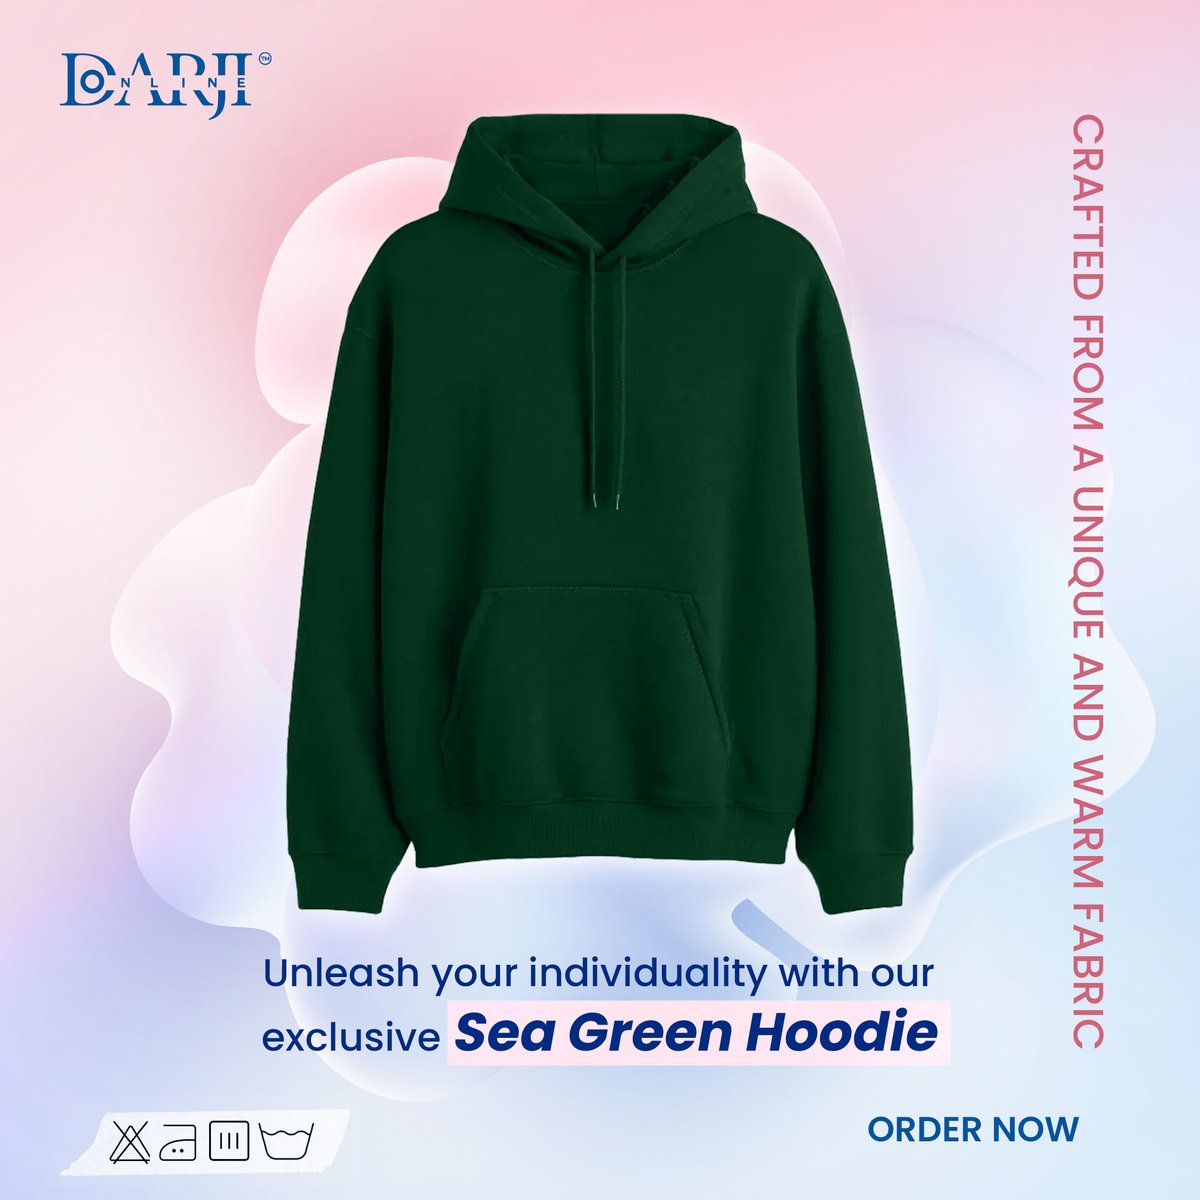 Stay cozy and stand out in our unique sea green hoodie - made with warm and comfortable fabric

#hoodies #hoodie #fashion #tshirts #clothing #streetwear #tshirt #apparel #sportswear #gymwear #clothingbrand #tracksuit #style #hoodieseason #tracksuits #shorts #hoodiestyle #leggings